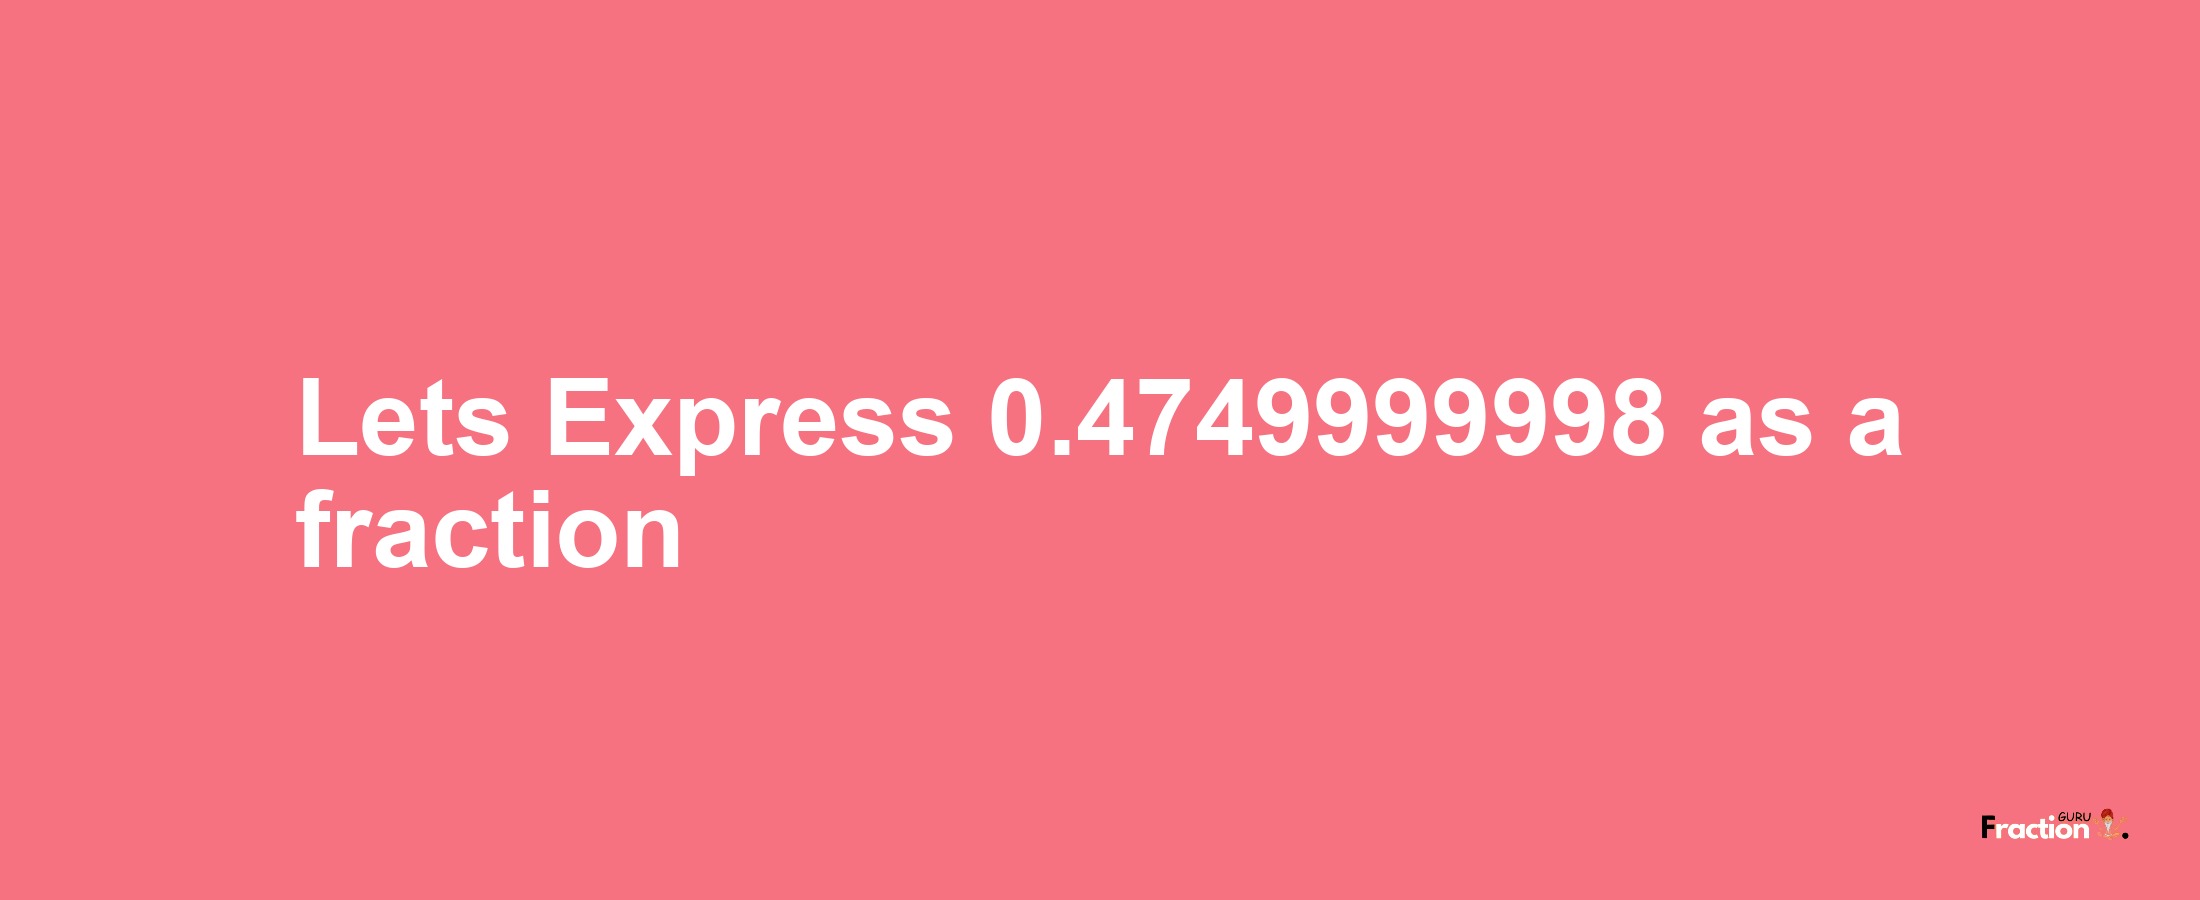 Lets Express 0.4749999998 as afraction